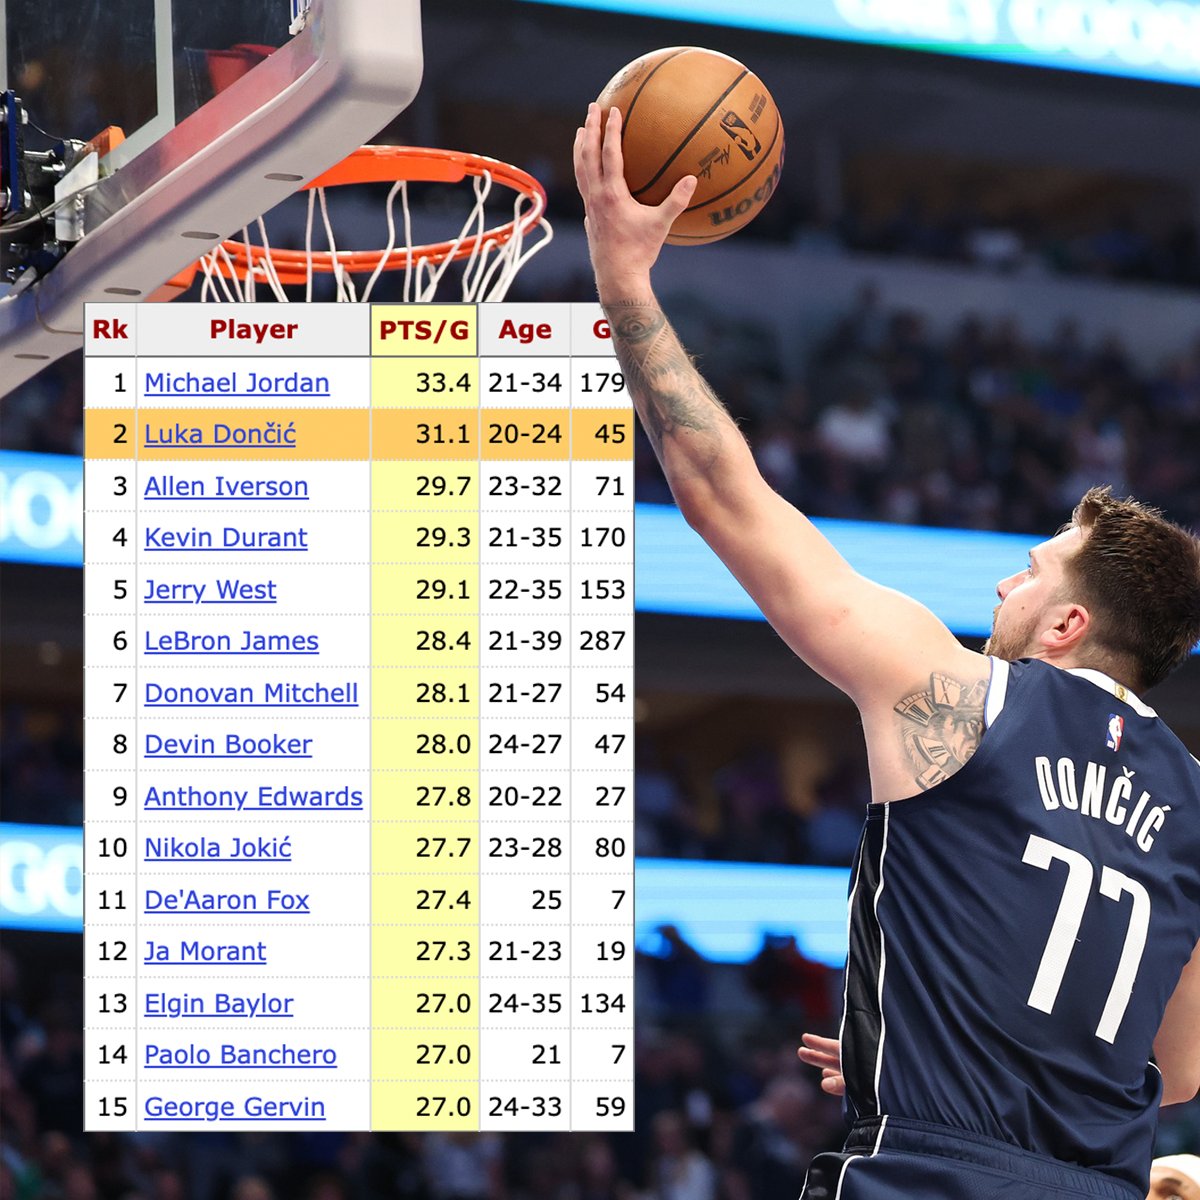 Every player in NBA history to average 30+ PPG in the playoffs:

— Michael Jordan
— Luka Dončić